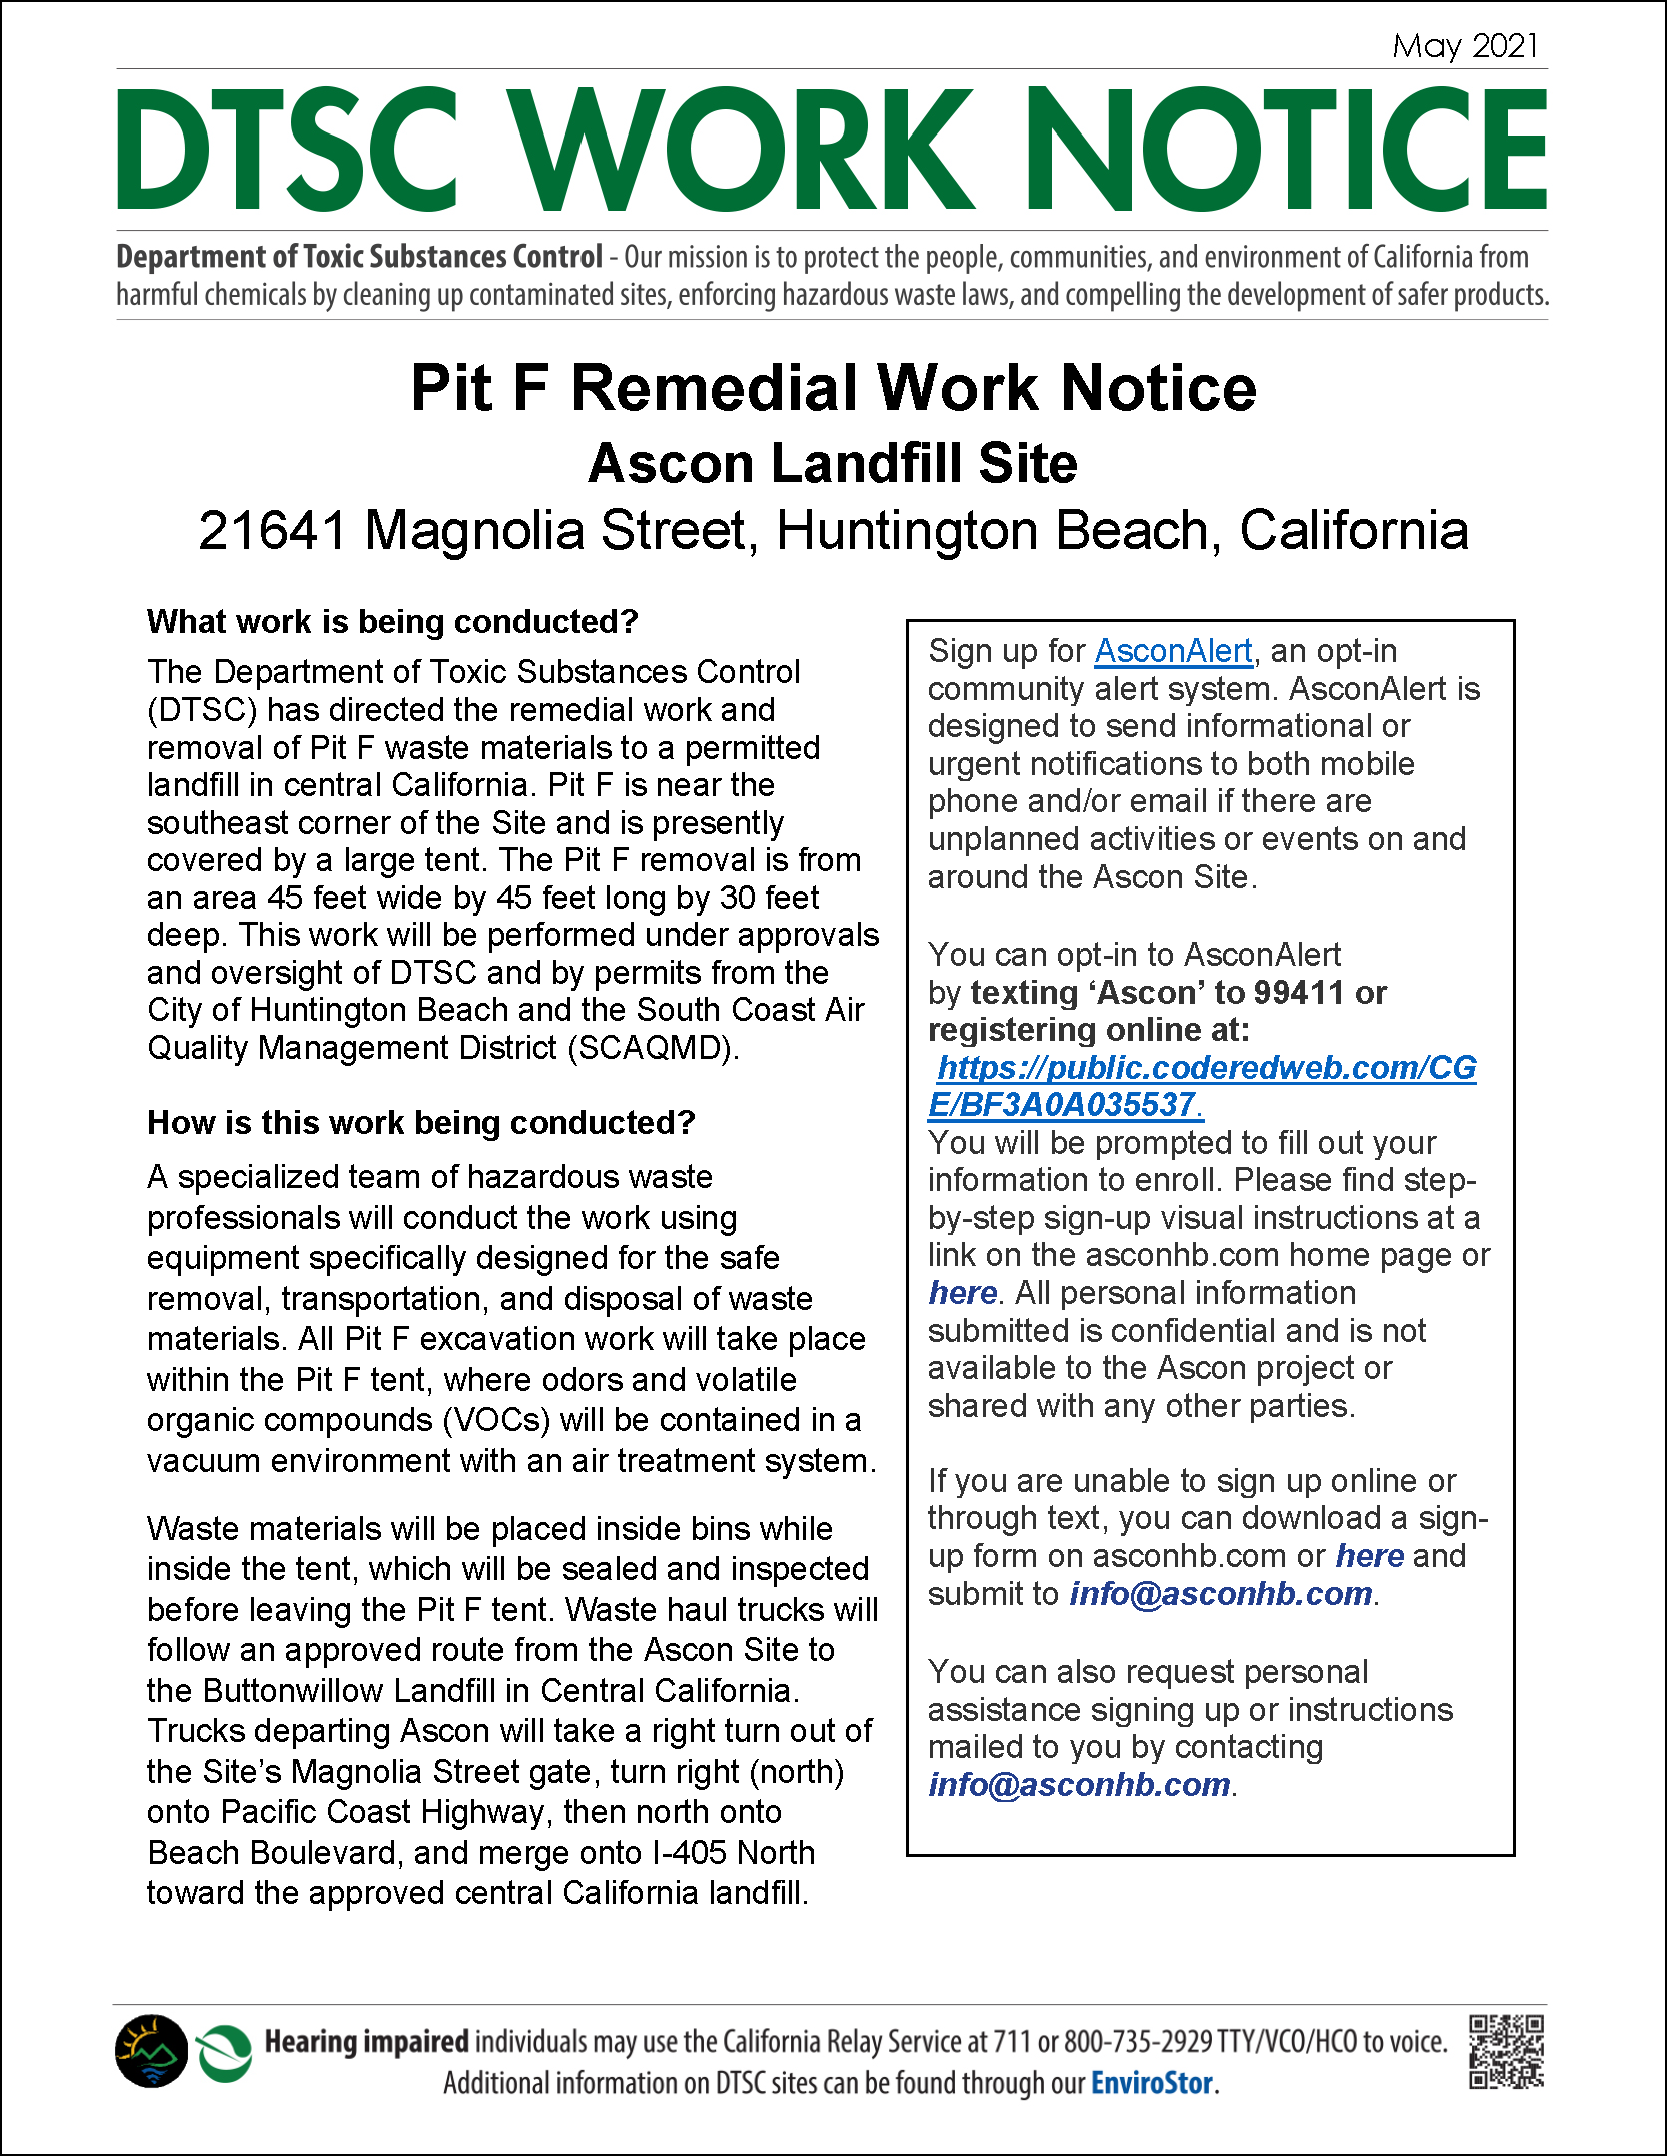 Ascon Landfill Pit F Remedial Work Notice